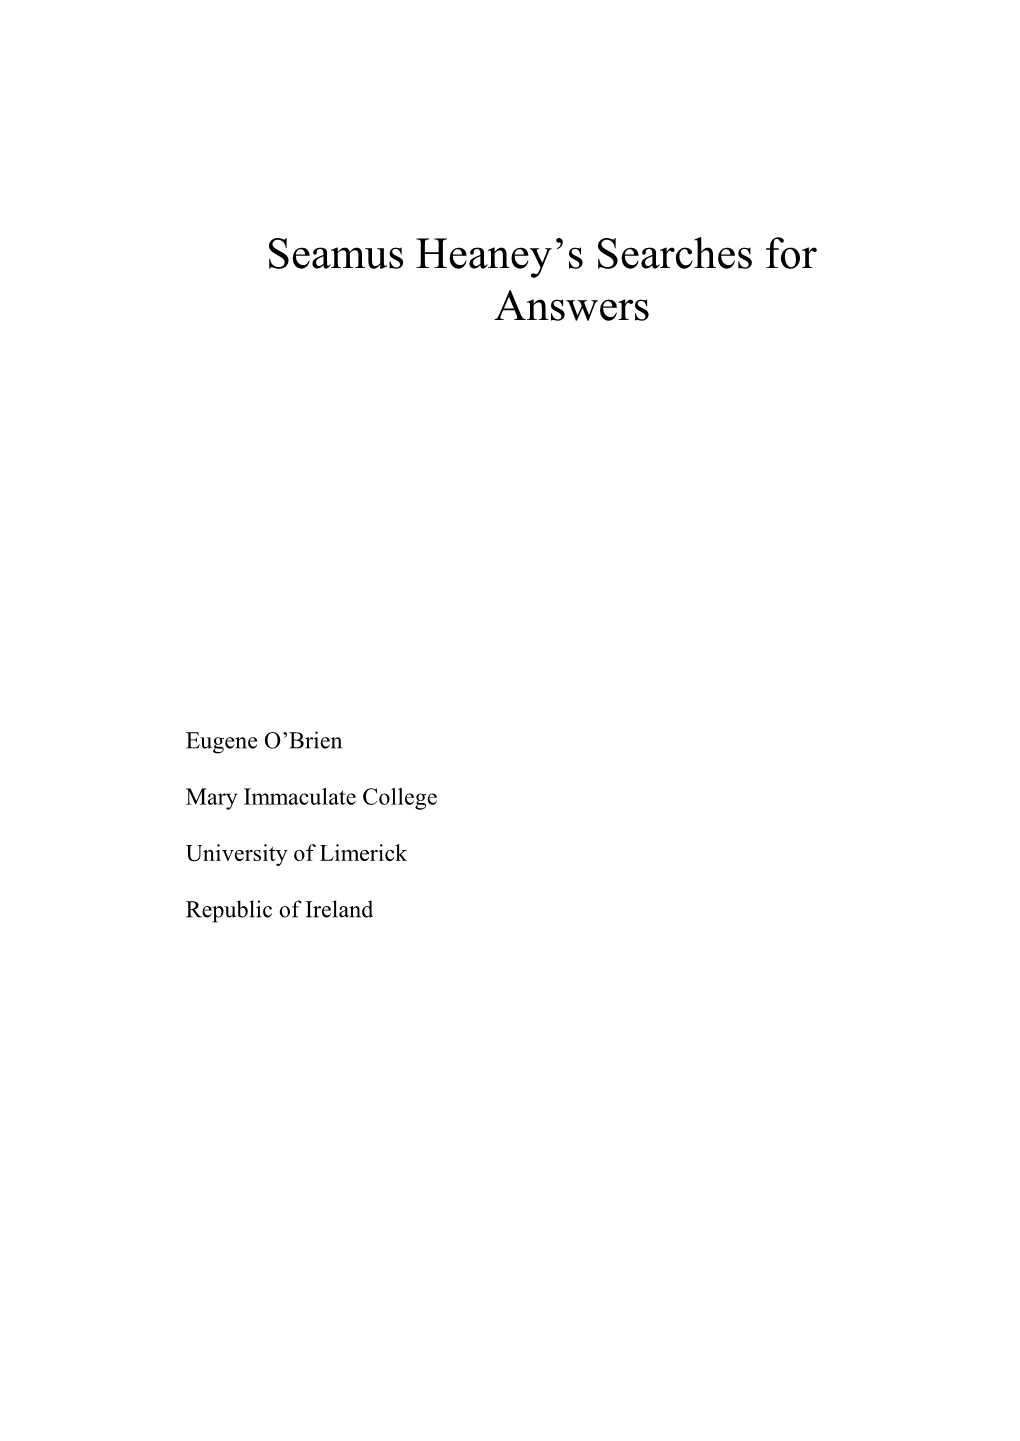 Seamus Heaney's Searches for Answers